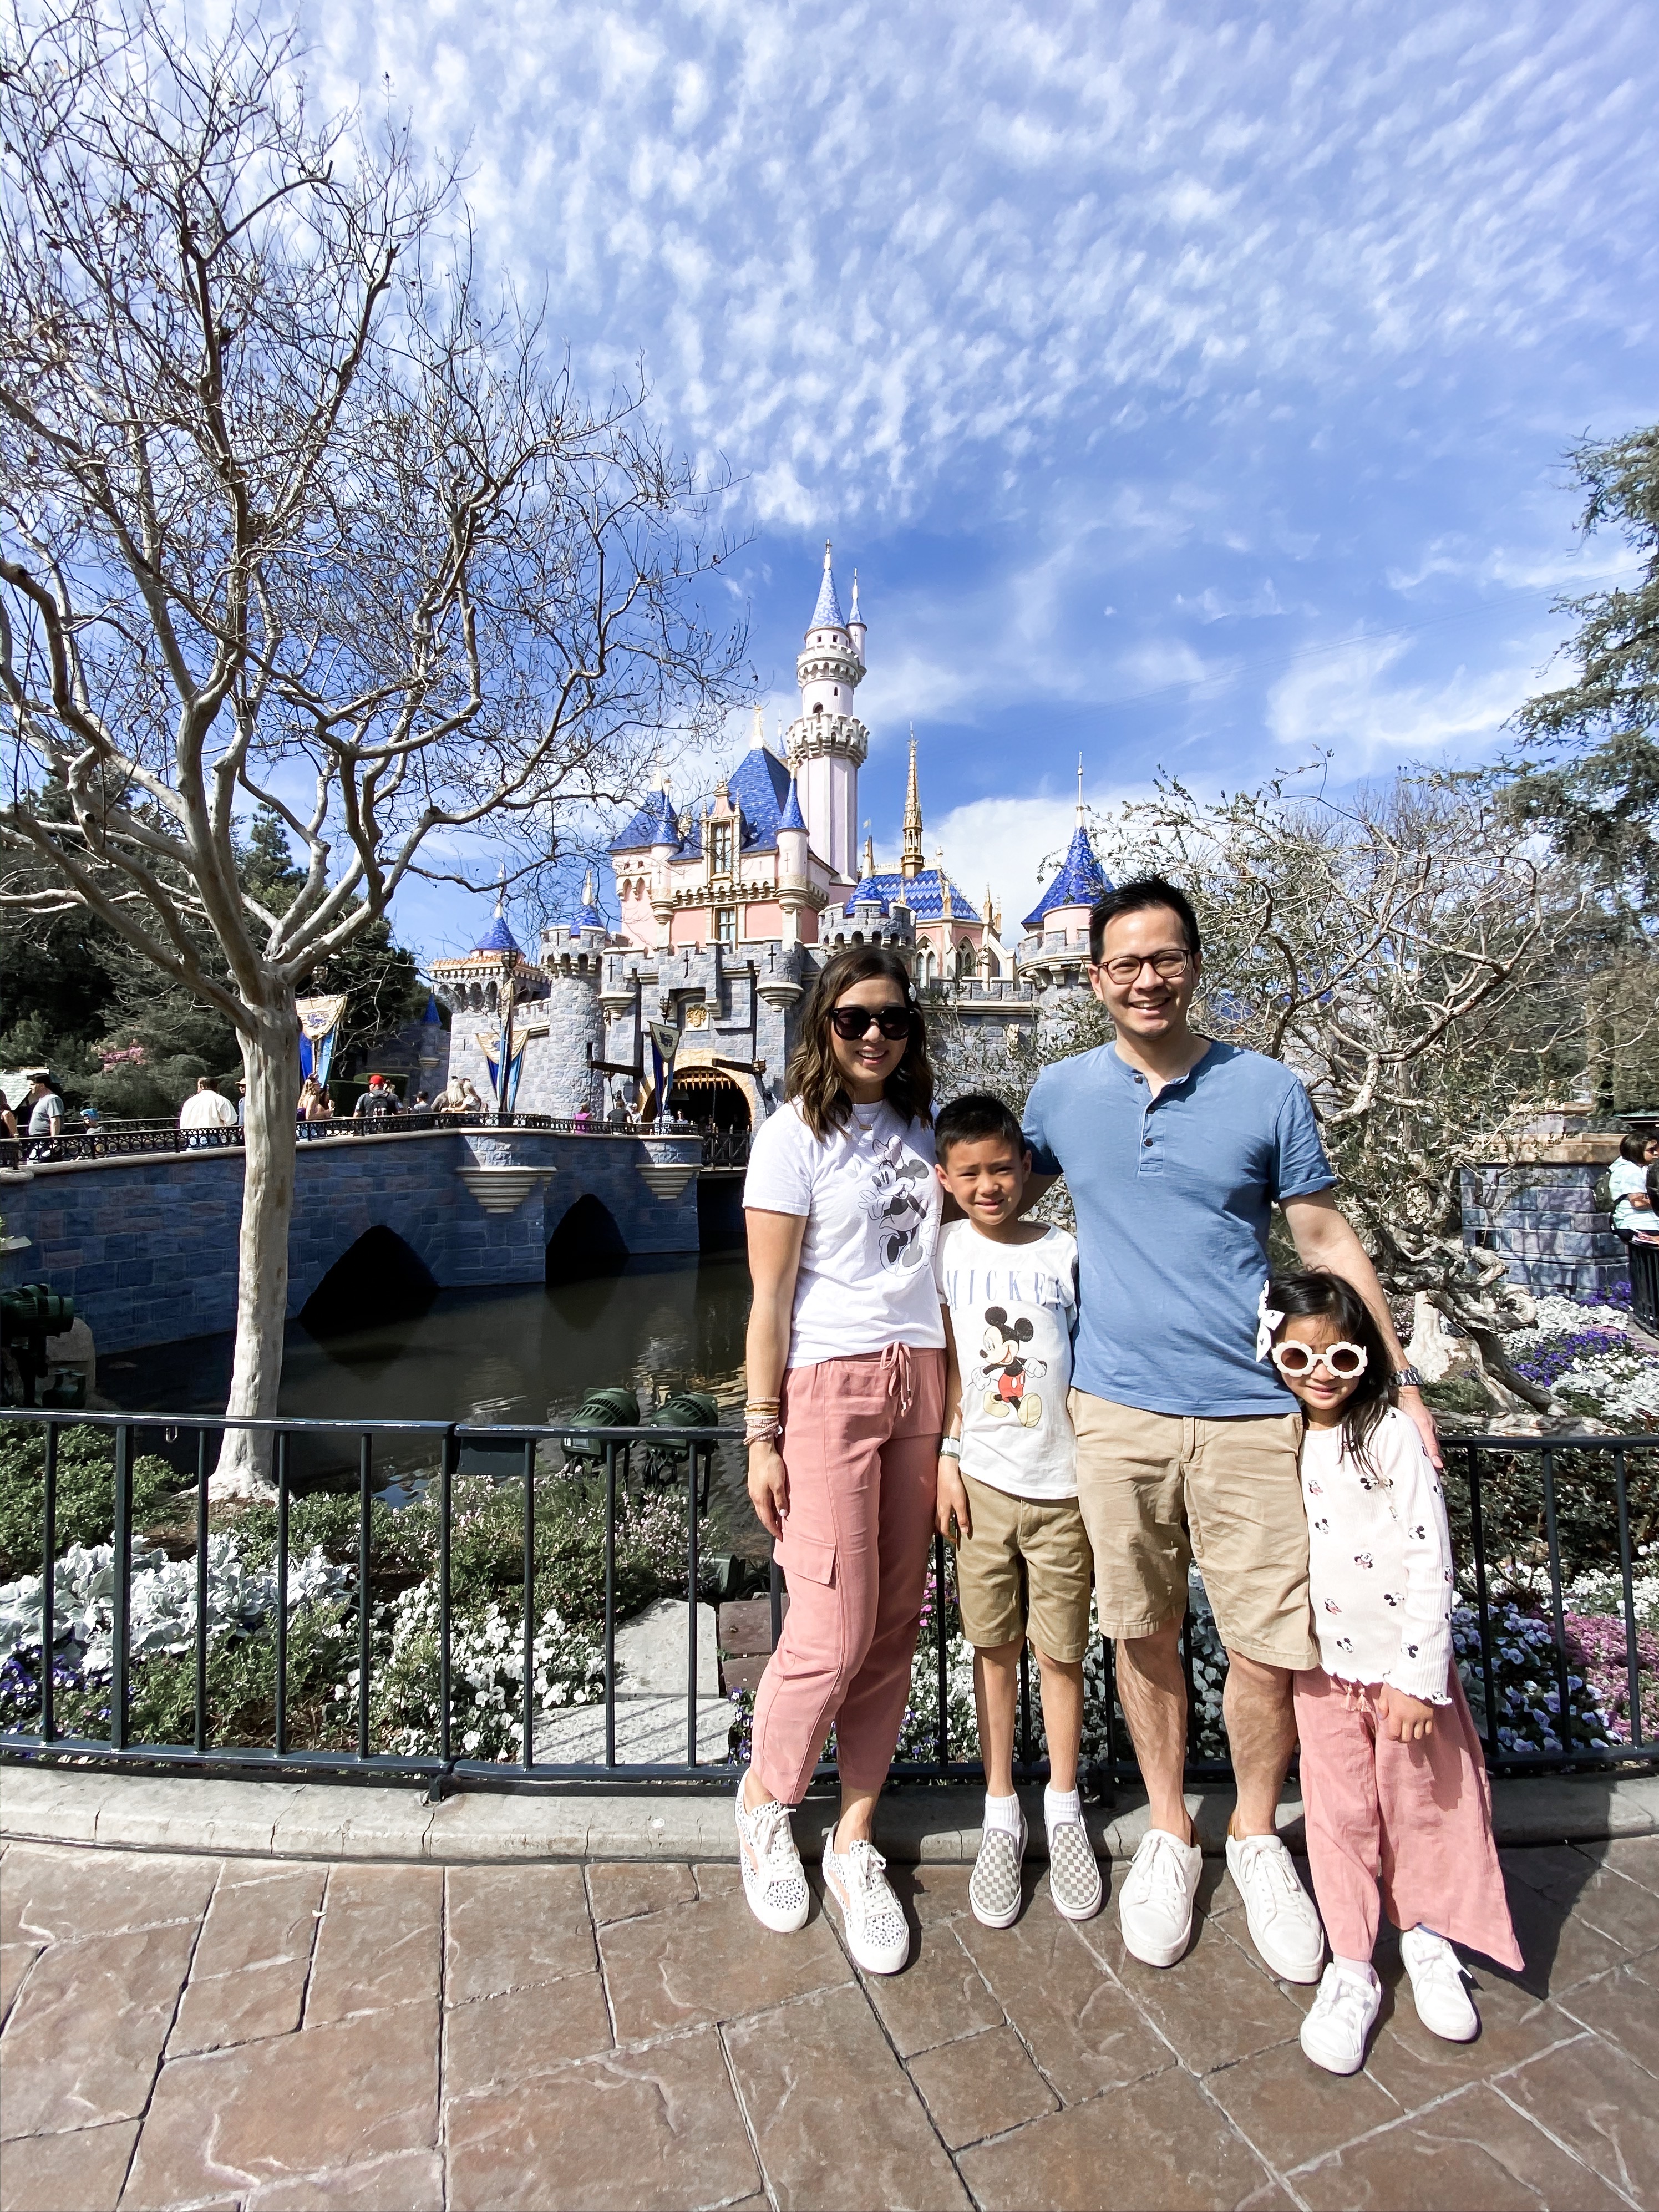 What To Wear For A Disney Trip: Outfits For The Entire Family